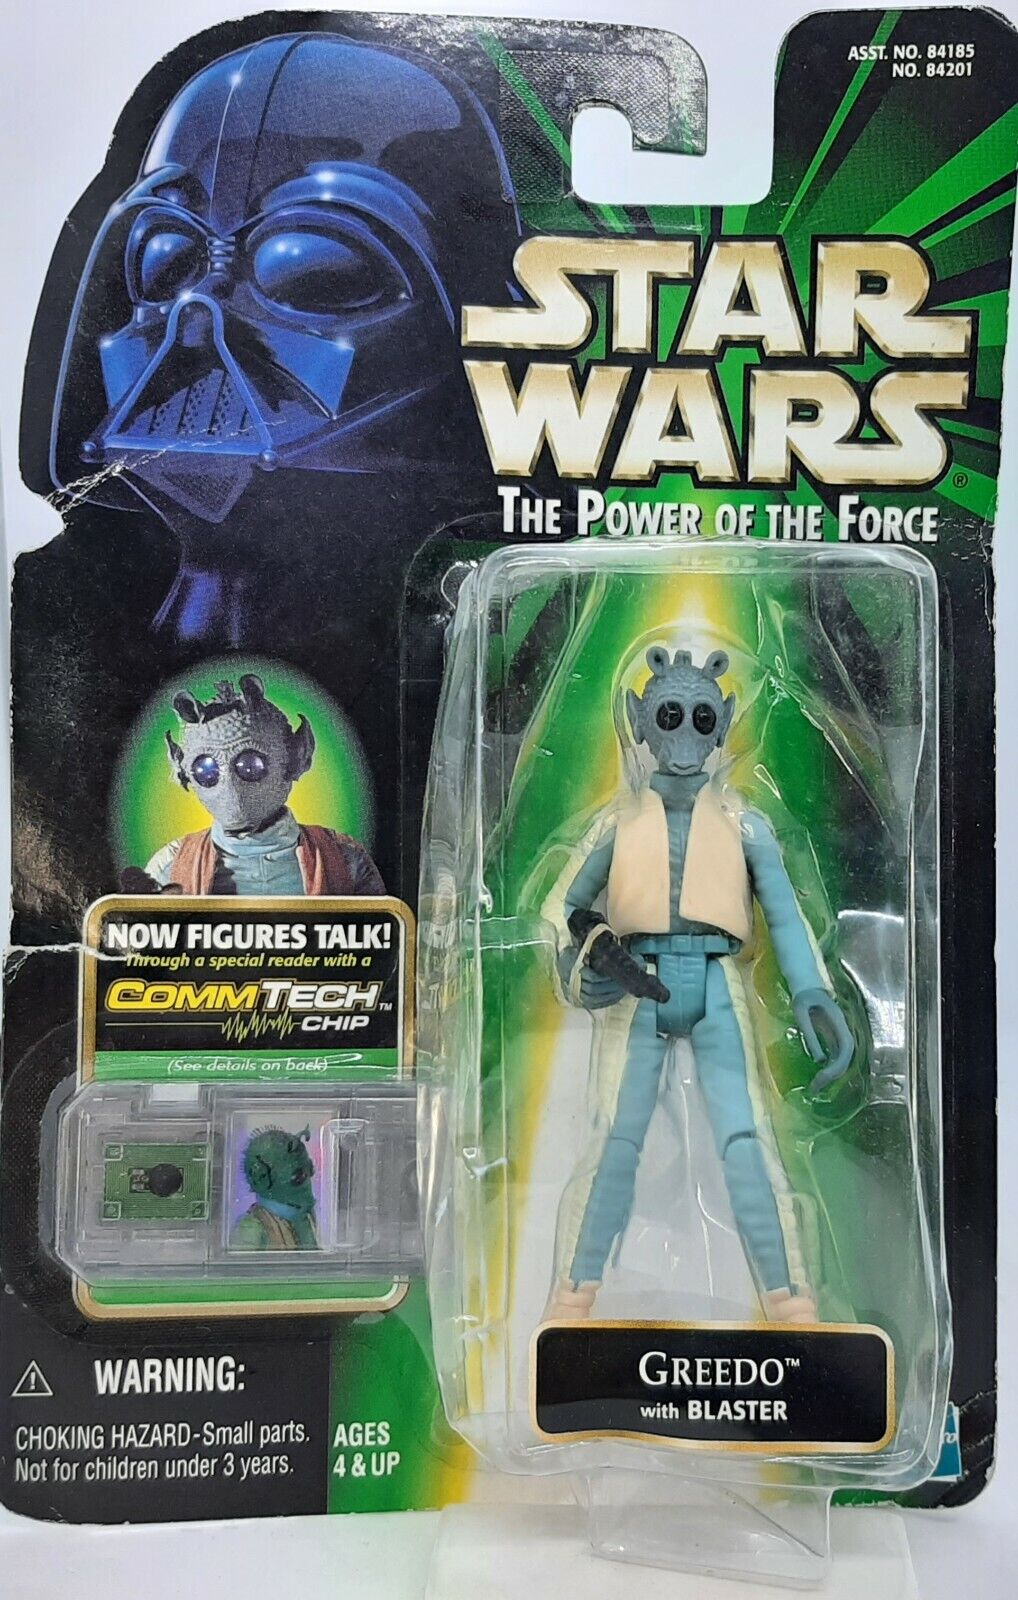 Star Wars The Power of the Force ~ Greedo(with Blaster)